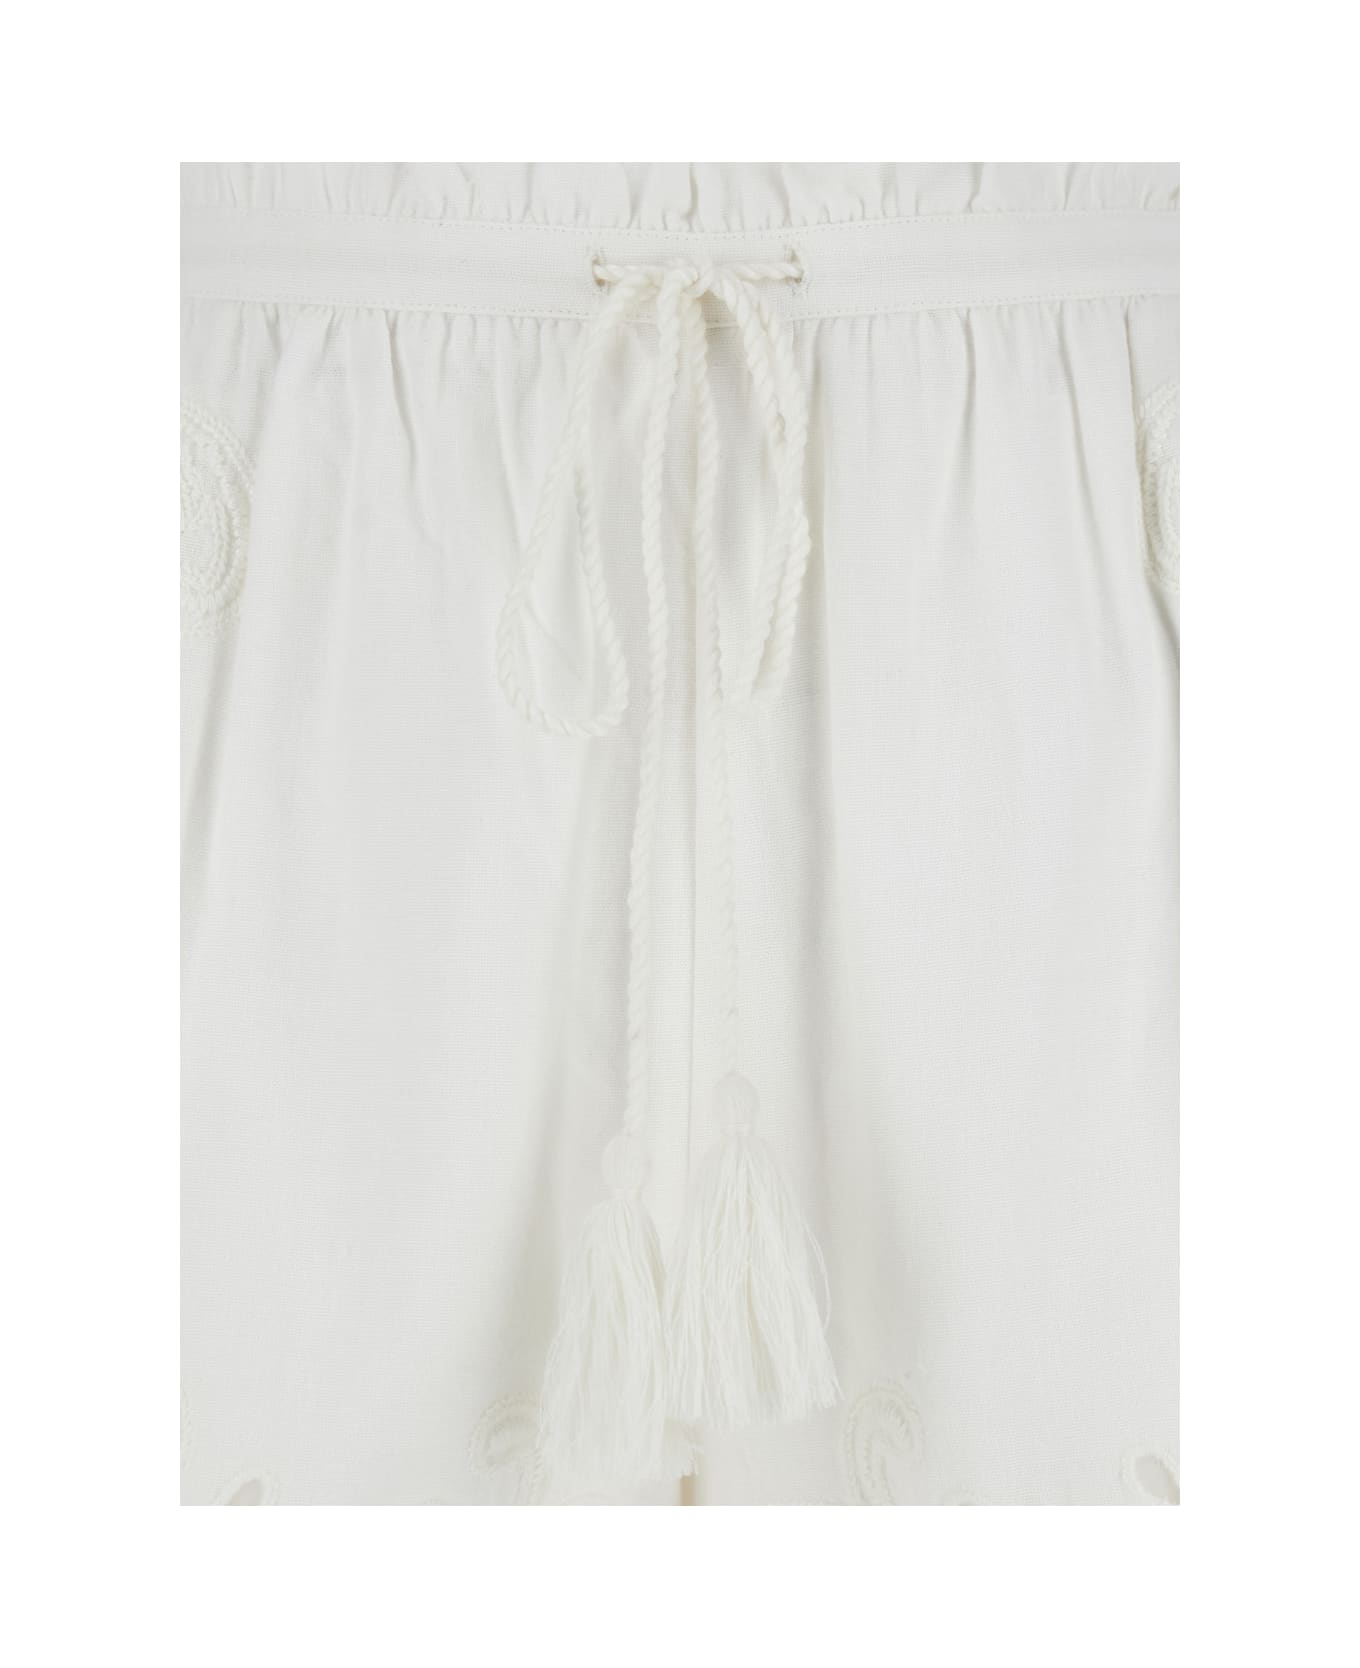 TwinSet White Shorts With Drawstring And Embroideries In Cotton And Linen Woman - White